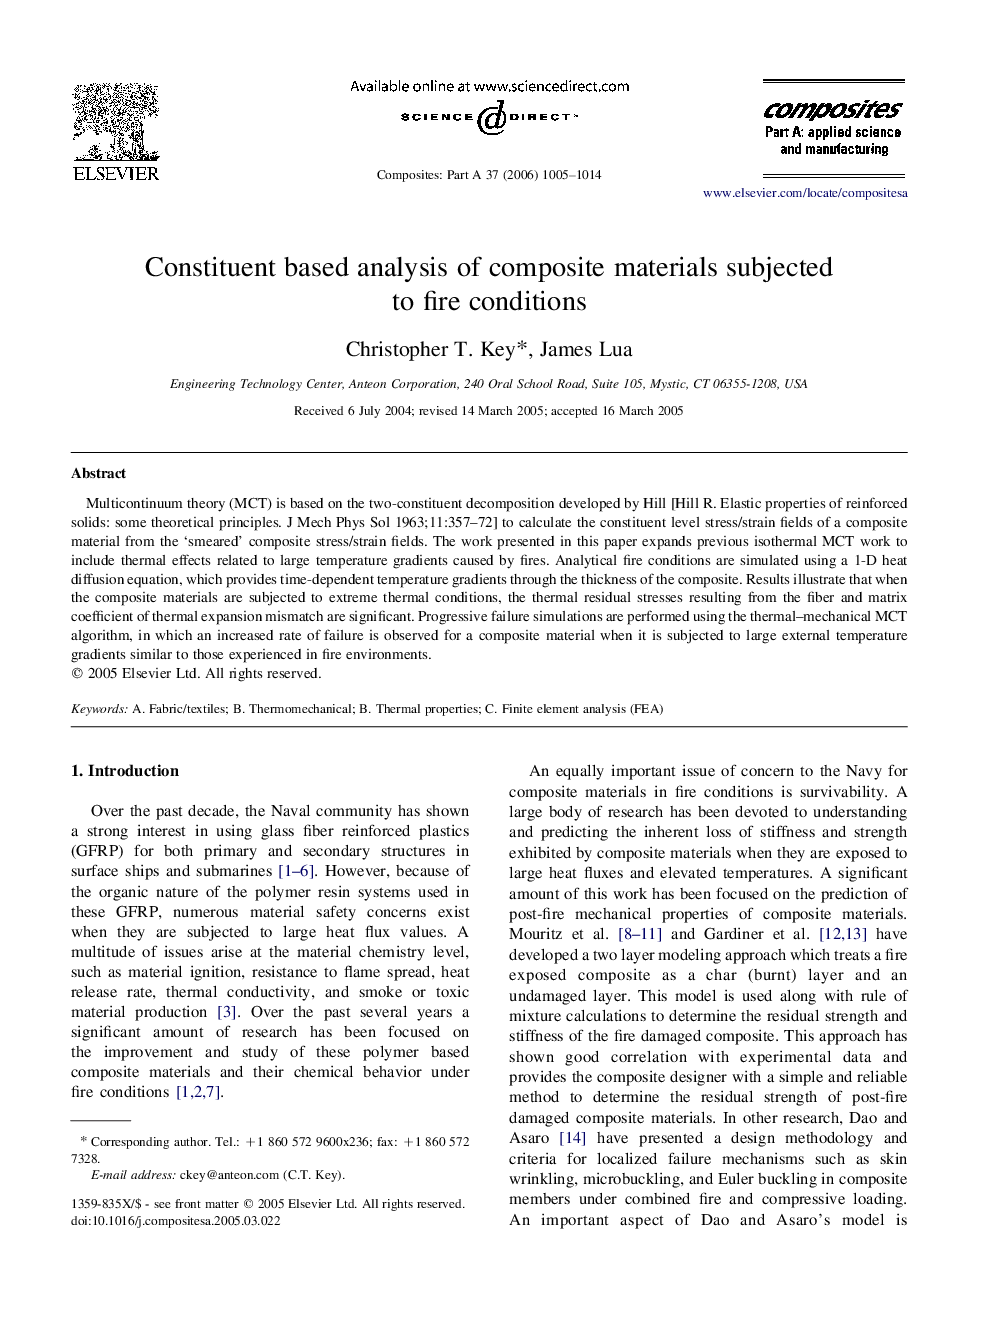 Constituent based analysis of composite materials subjected to fire conditions